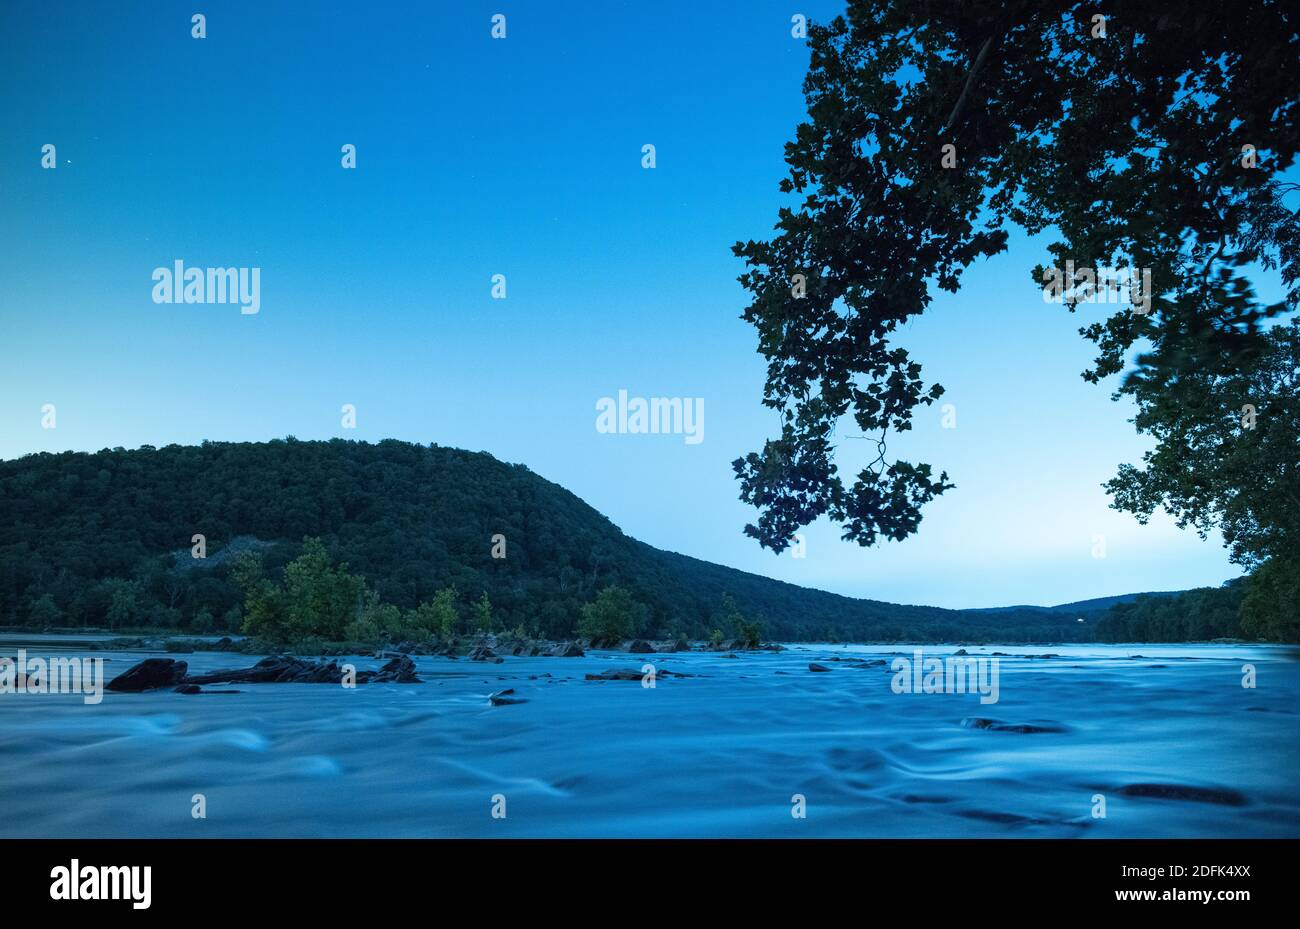 The Potomac River flows between the border of Virginia and Maryland. Stock Photo